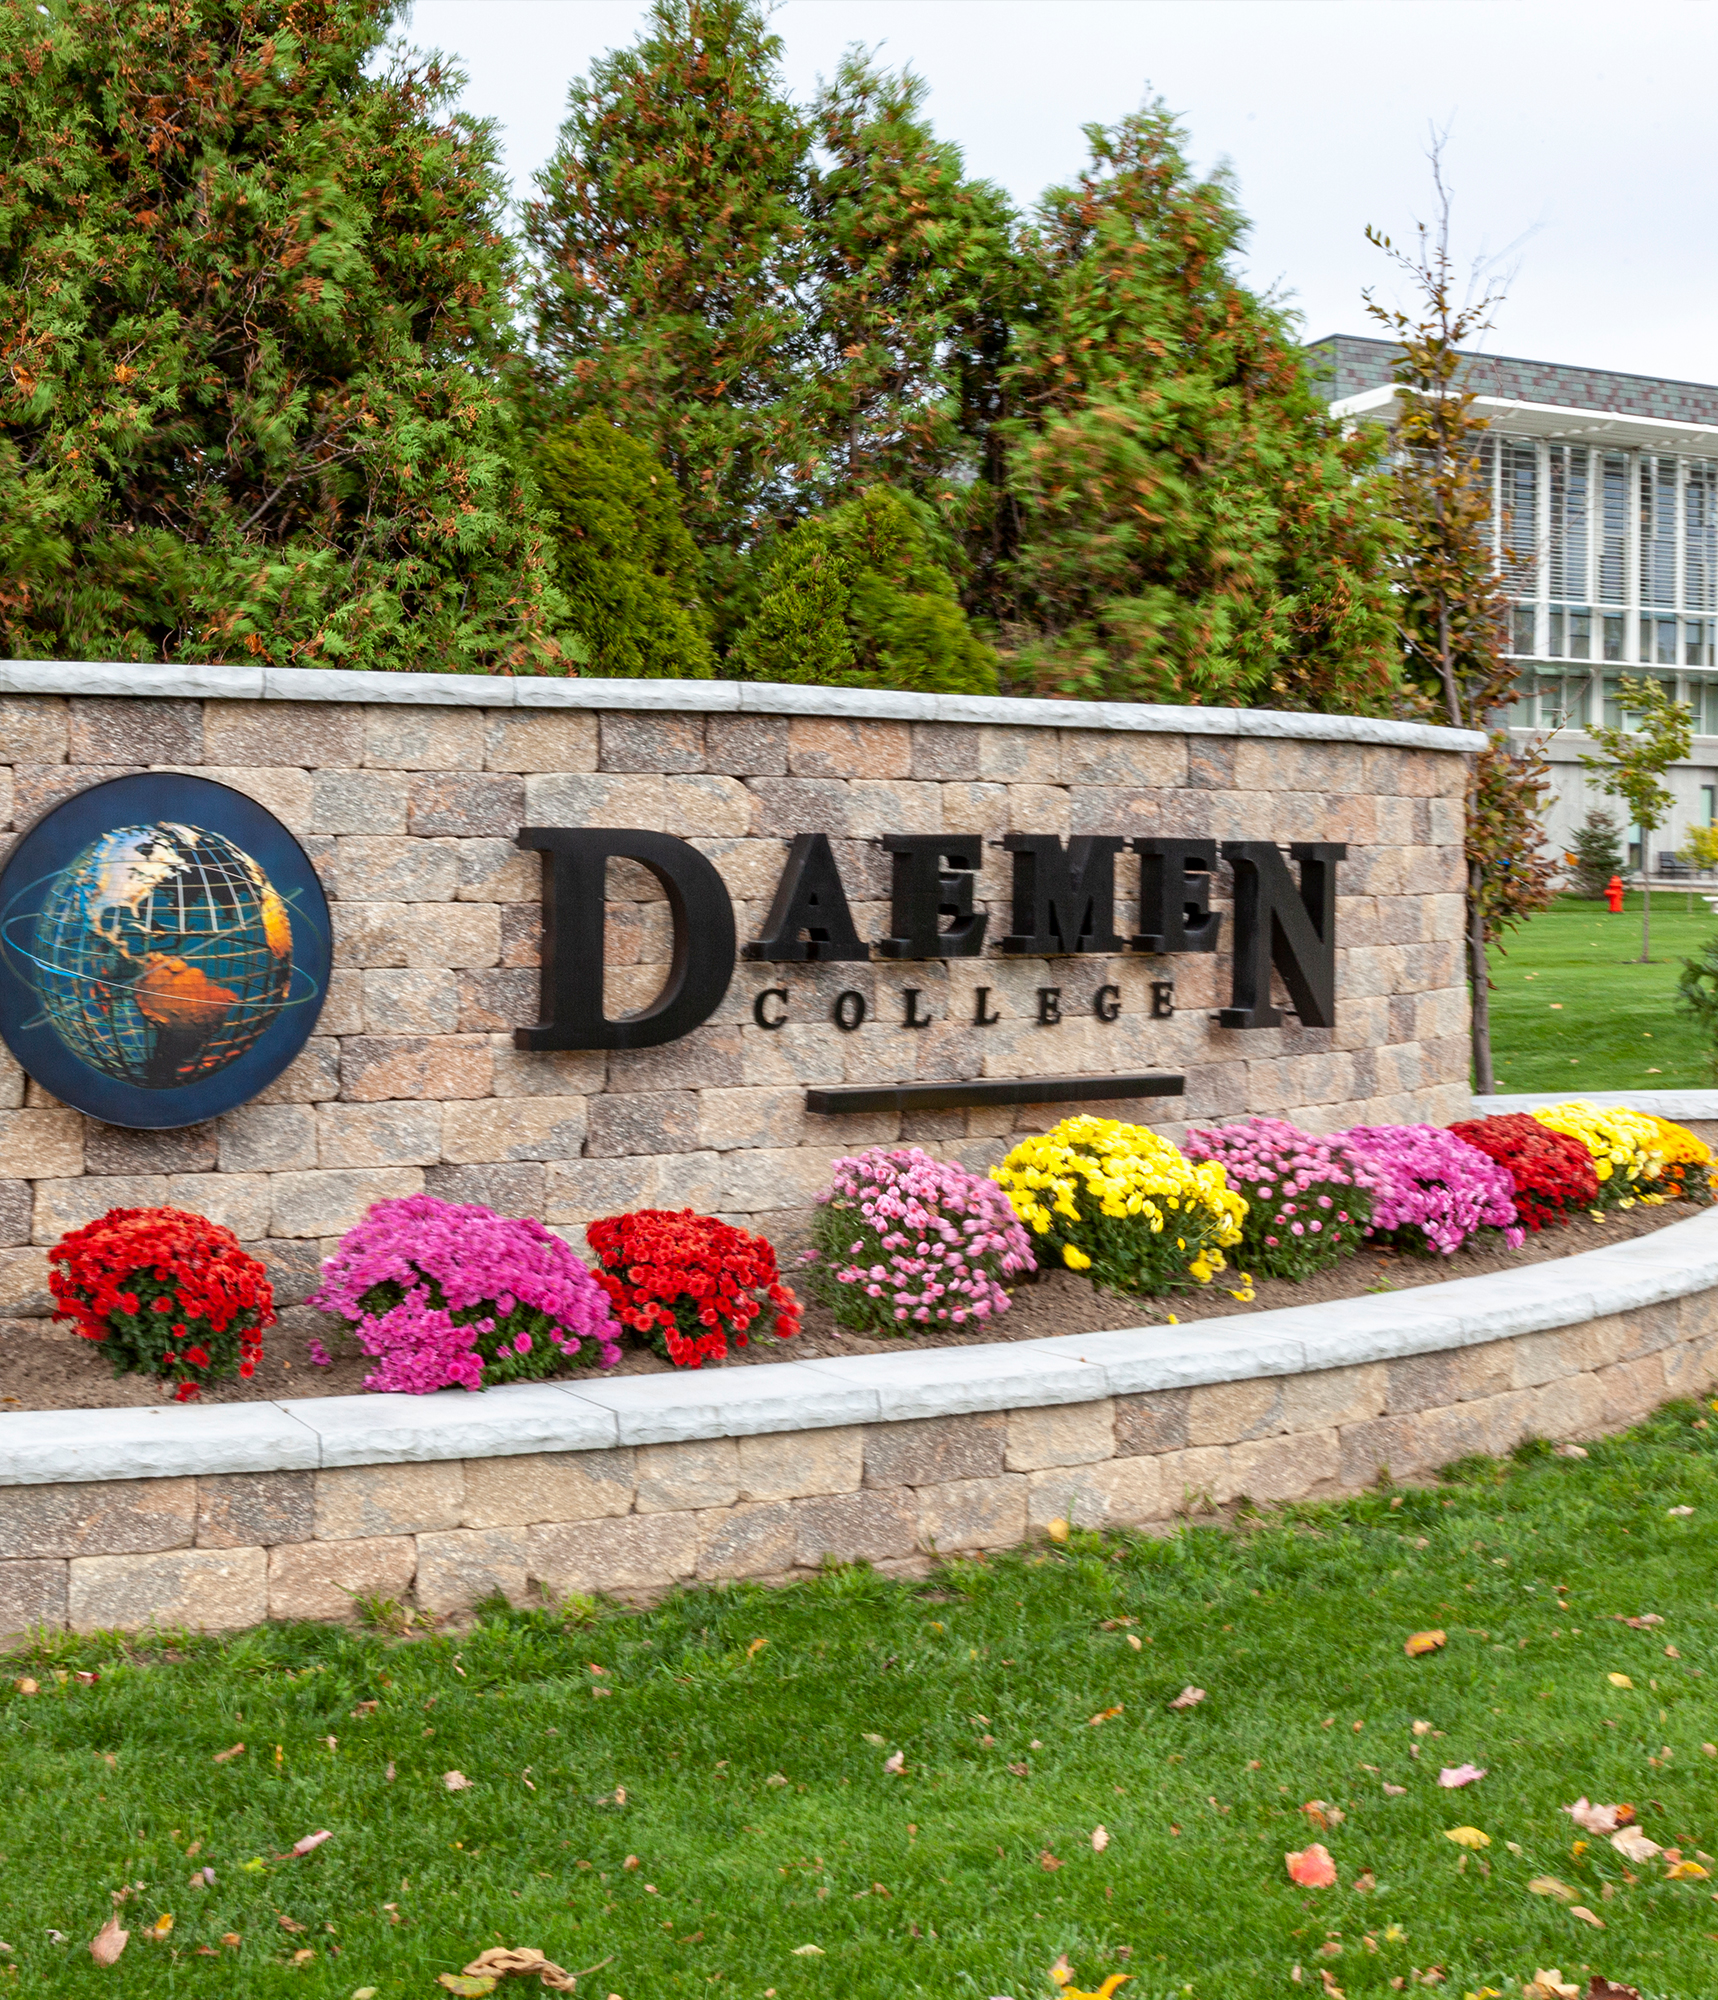 With a parking lot and building in the background, a 2 Level Estate Wall on the lawn holds the logo for Daemen College, flowers, and trees.